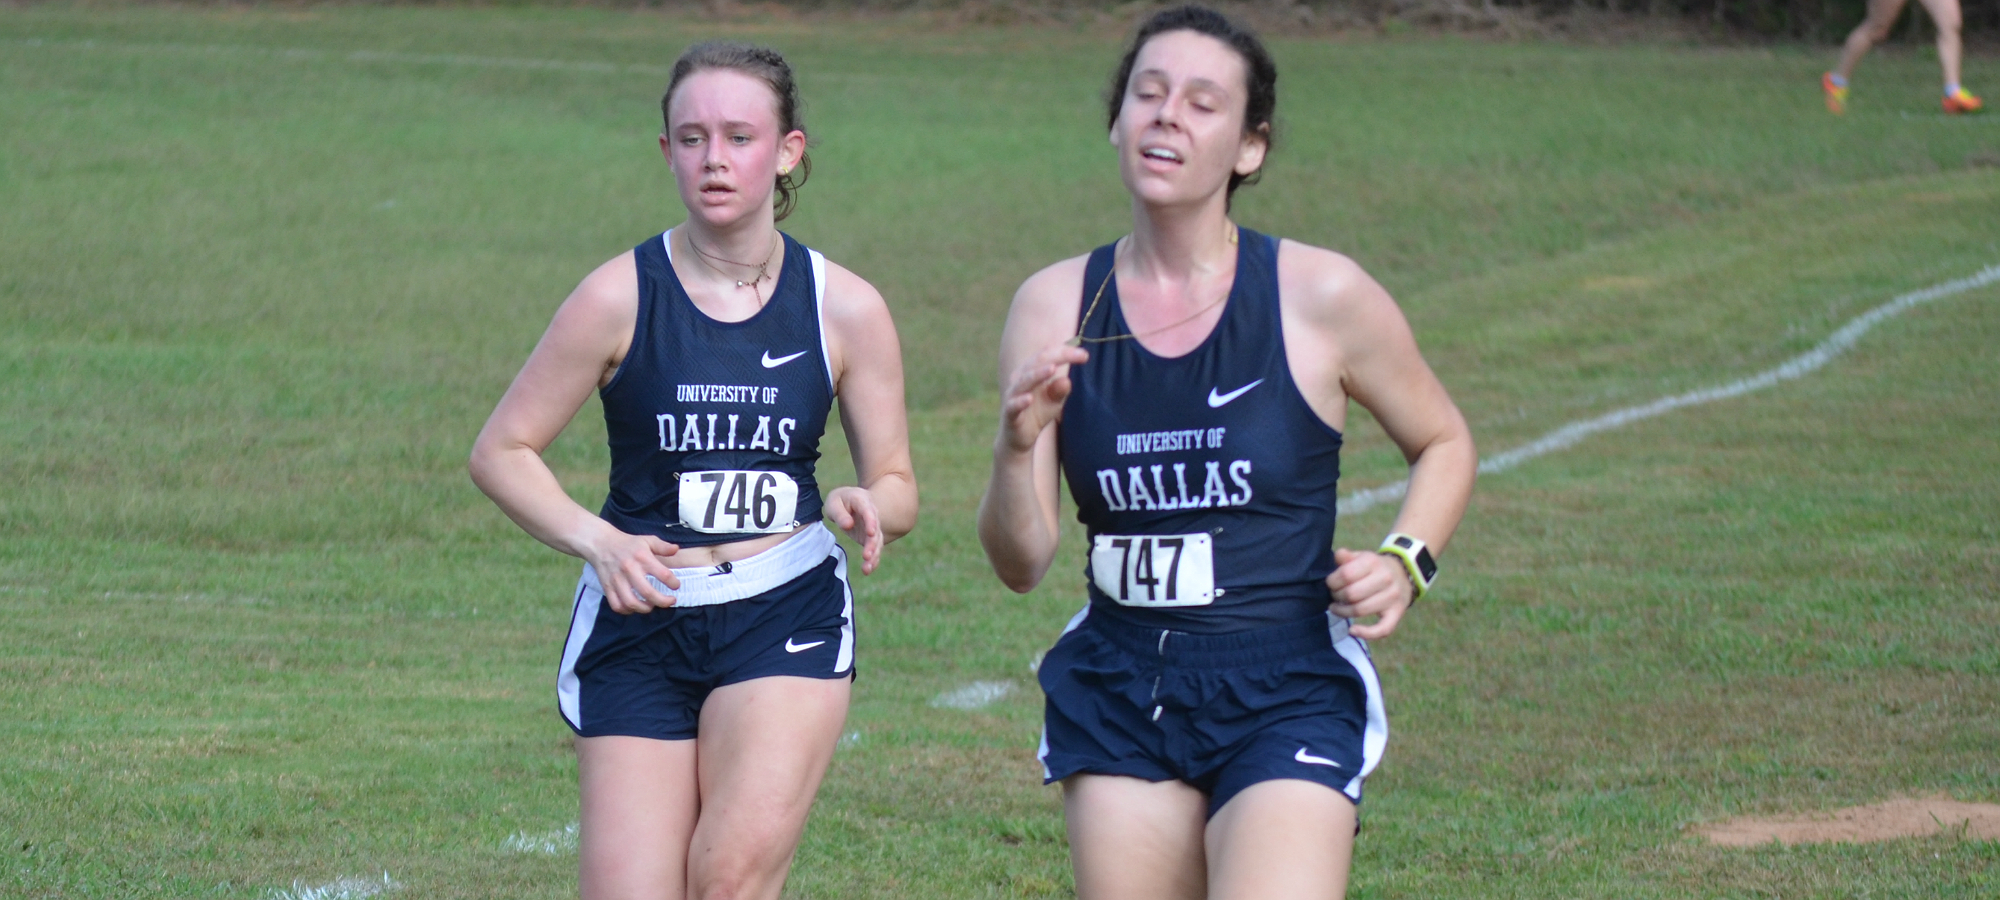 SCAC TOURNAMENT PREVIEW: Women's Cross Country Brings Depth into Saturday's Race